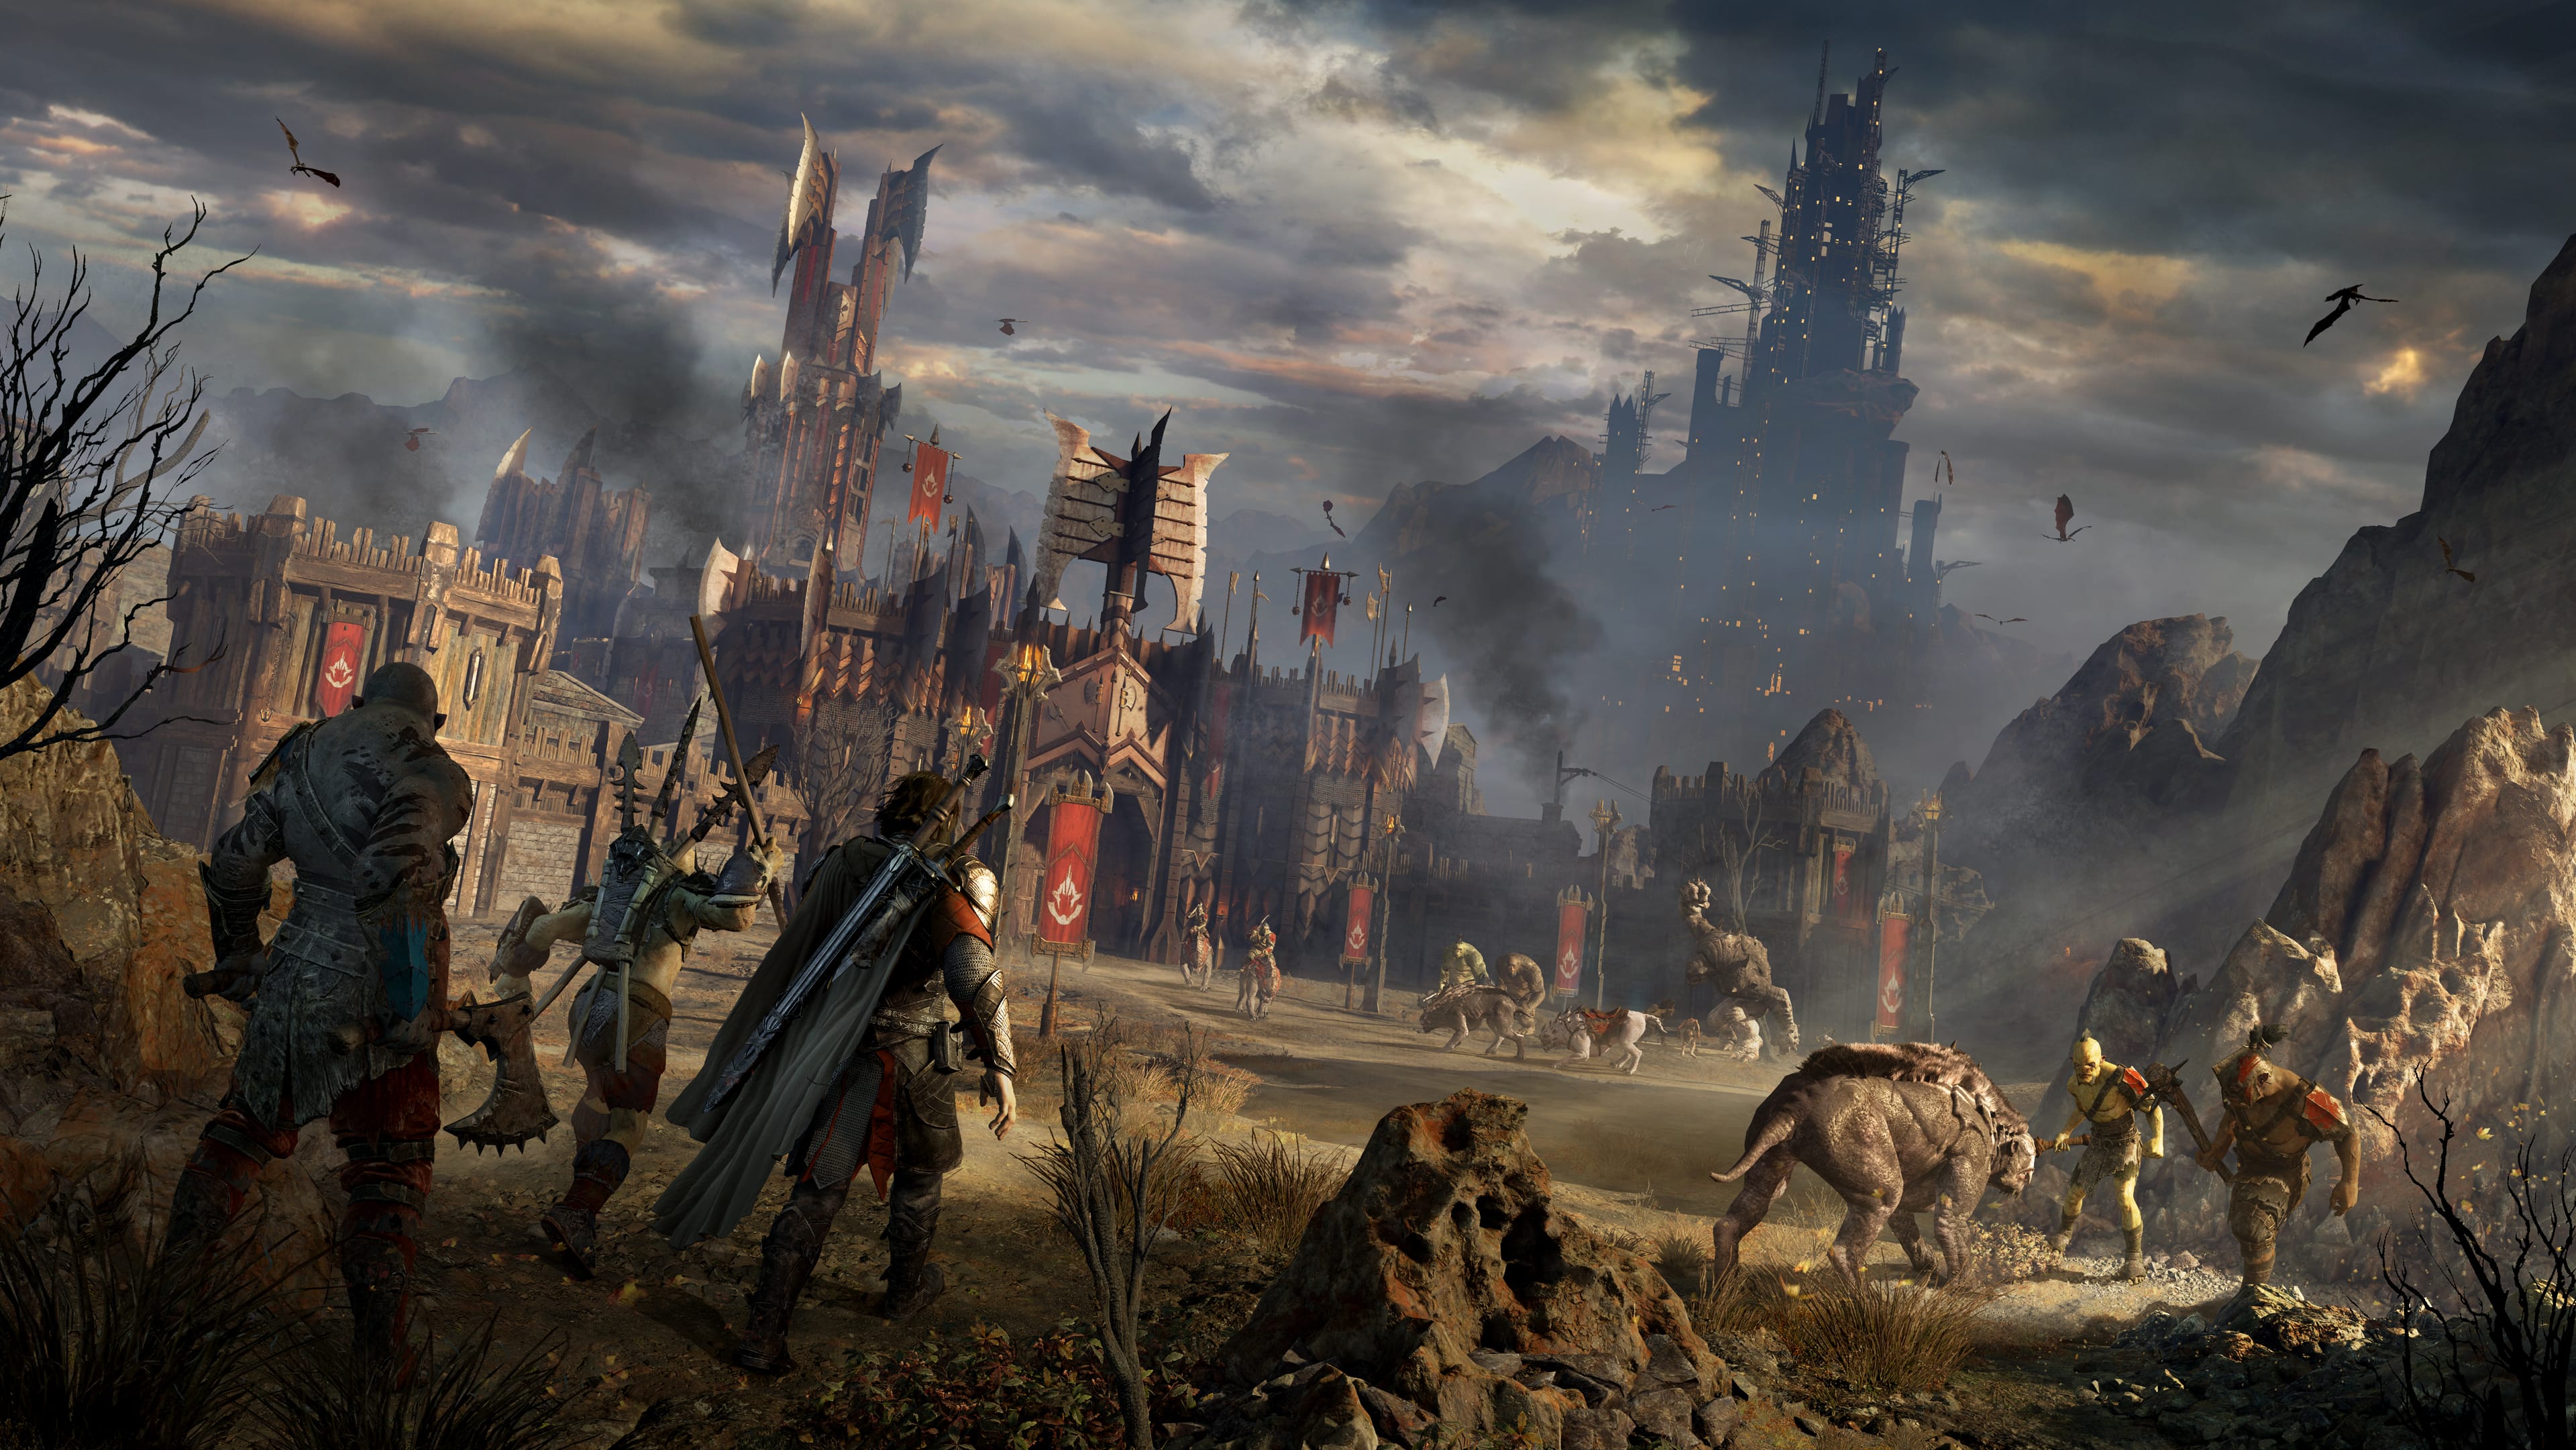 Middle-earth: Shadow of Mordor - Análise